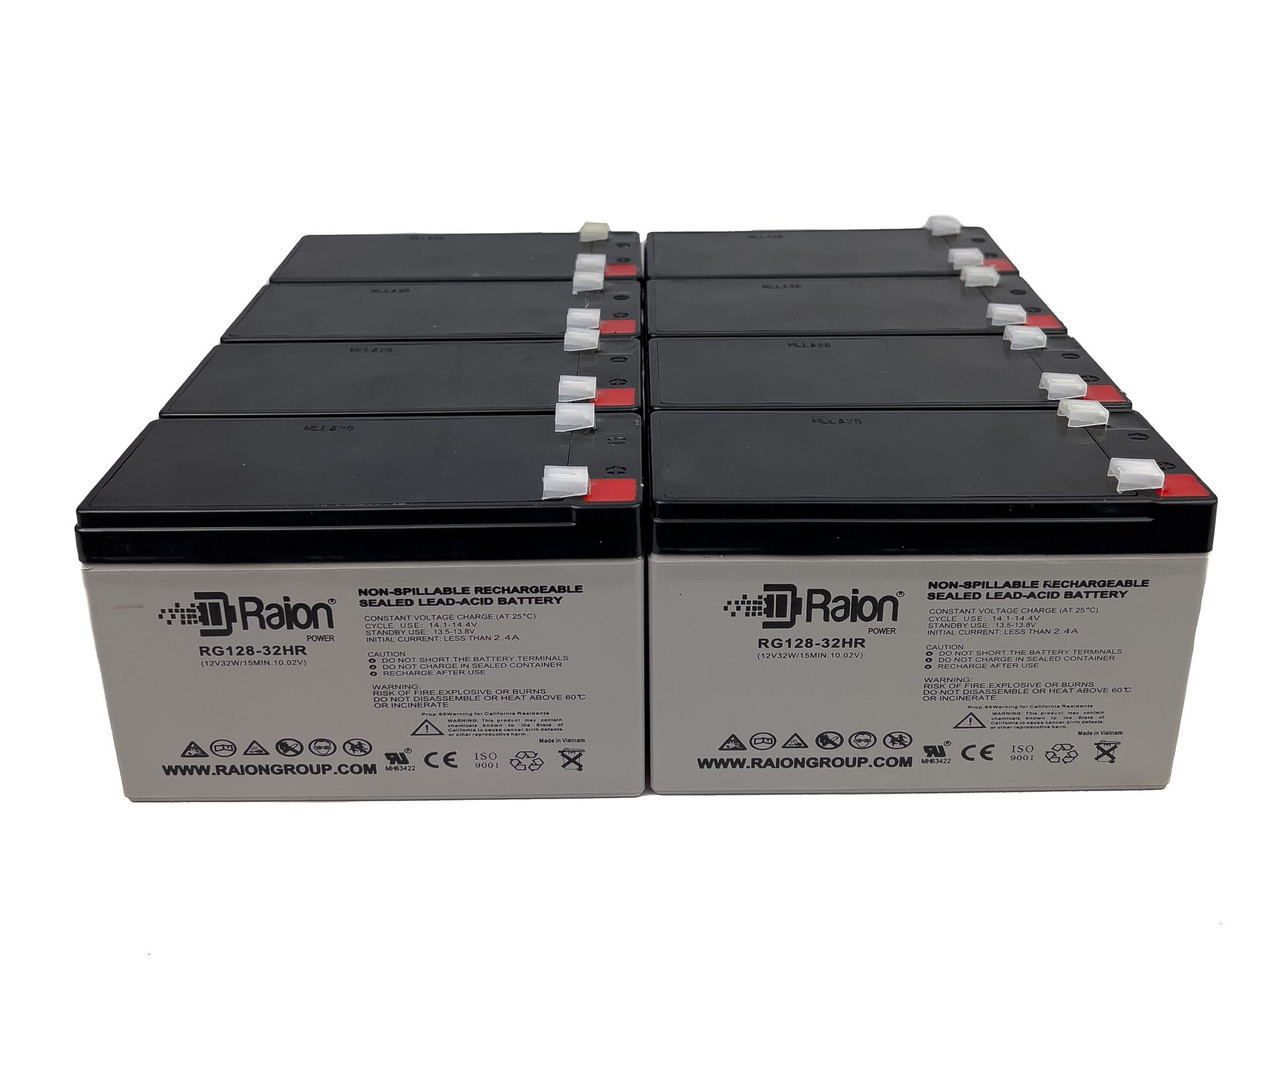 Raion Power 12V 7.5Ah High Rate Discharge UPS Batteries for Alpha Technologies Pinbp700t - 8 Pack